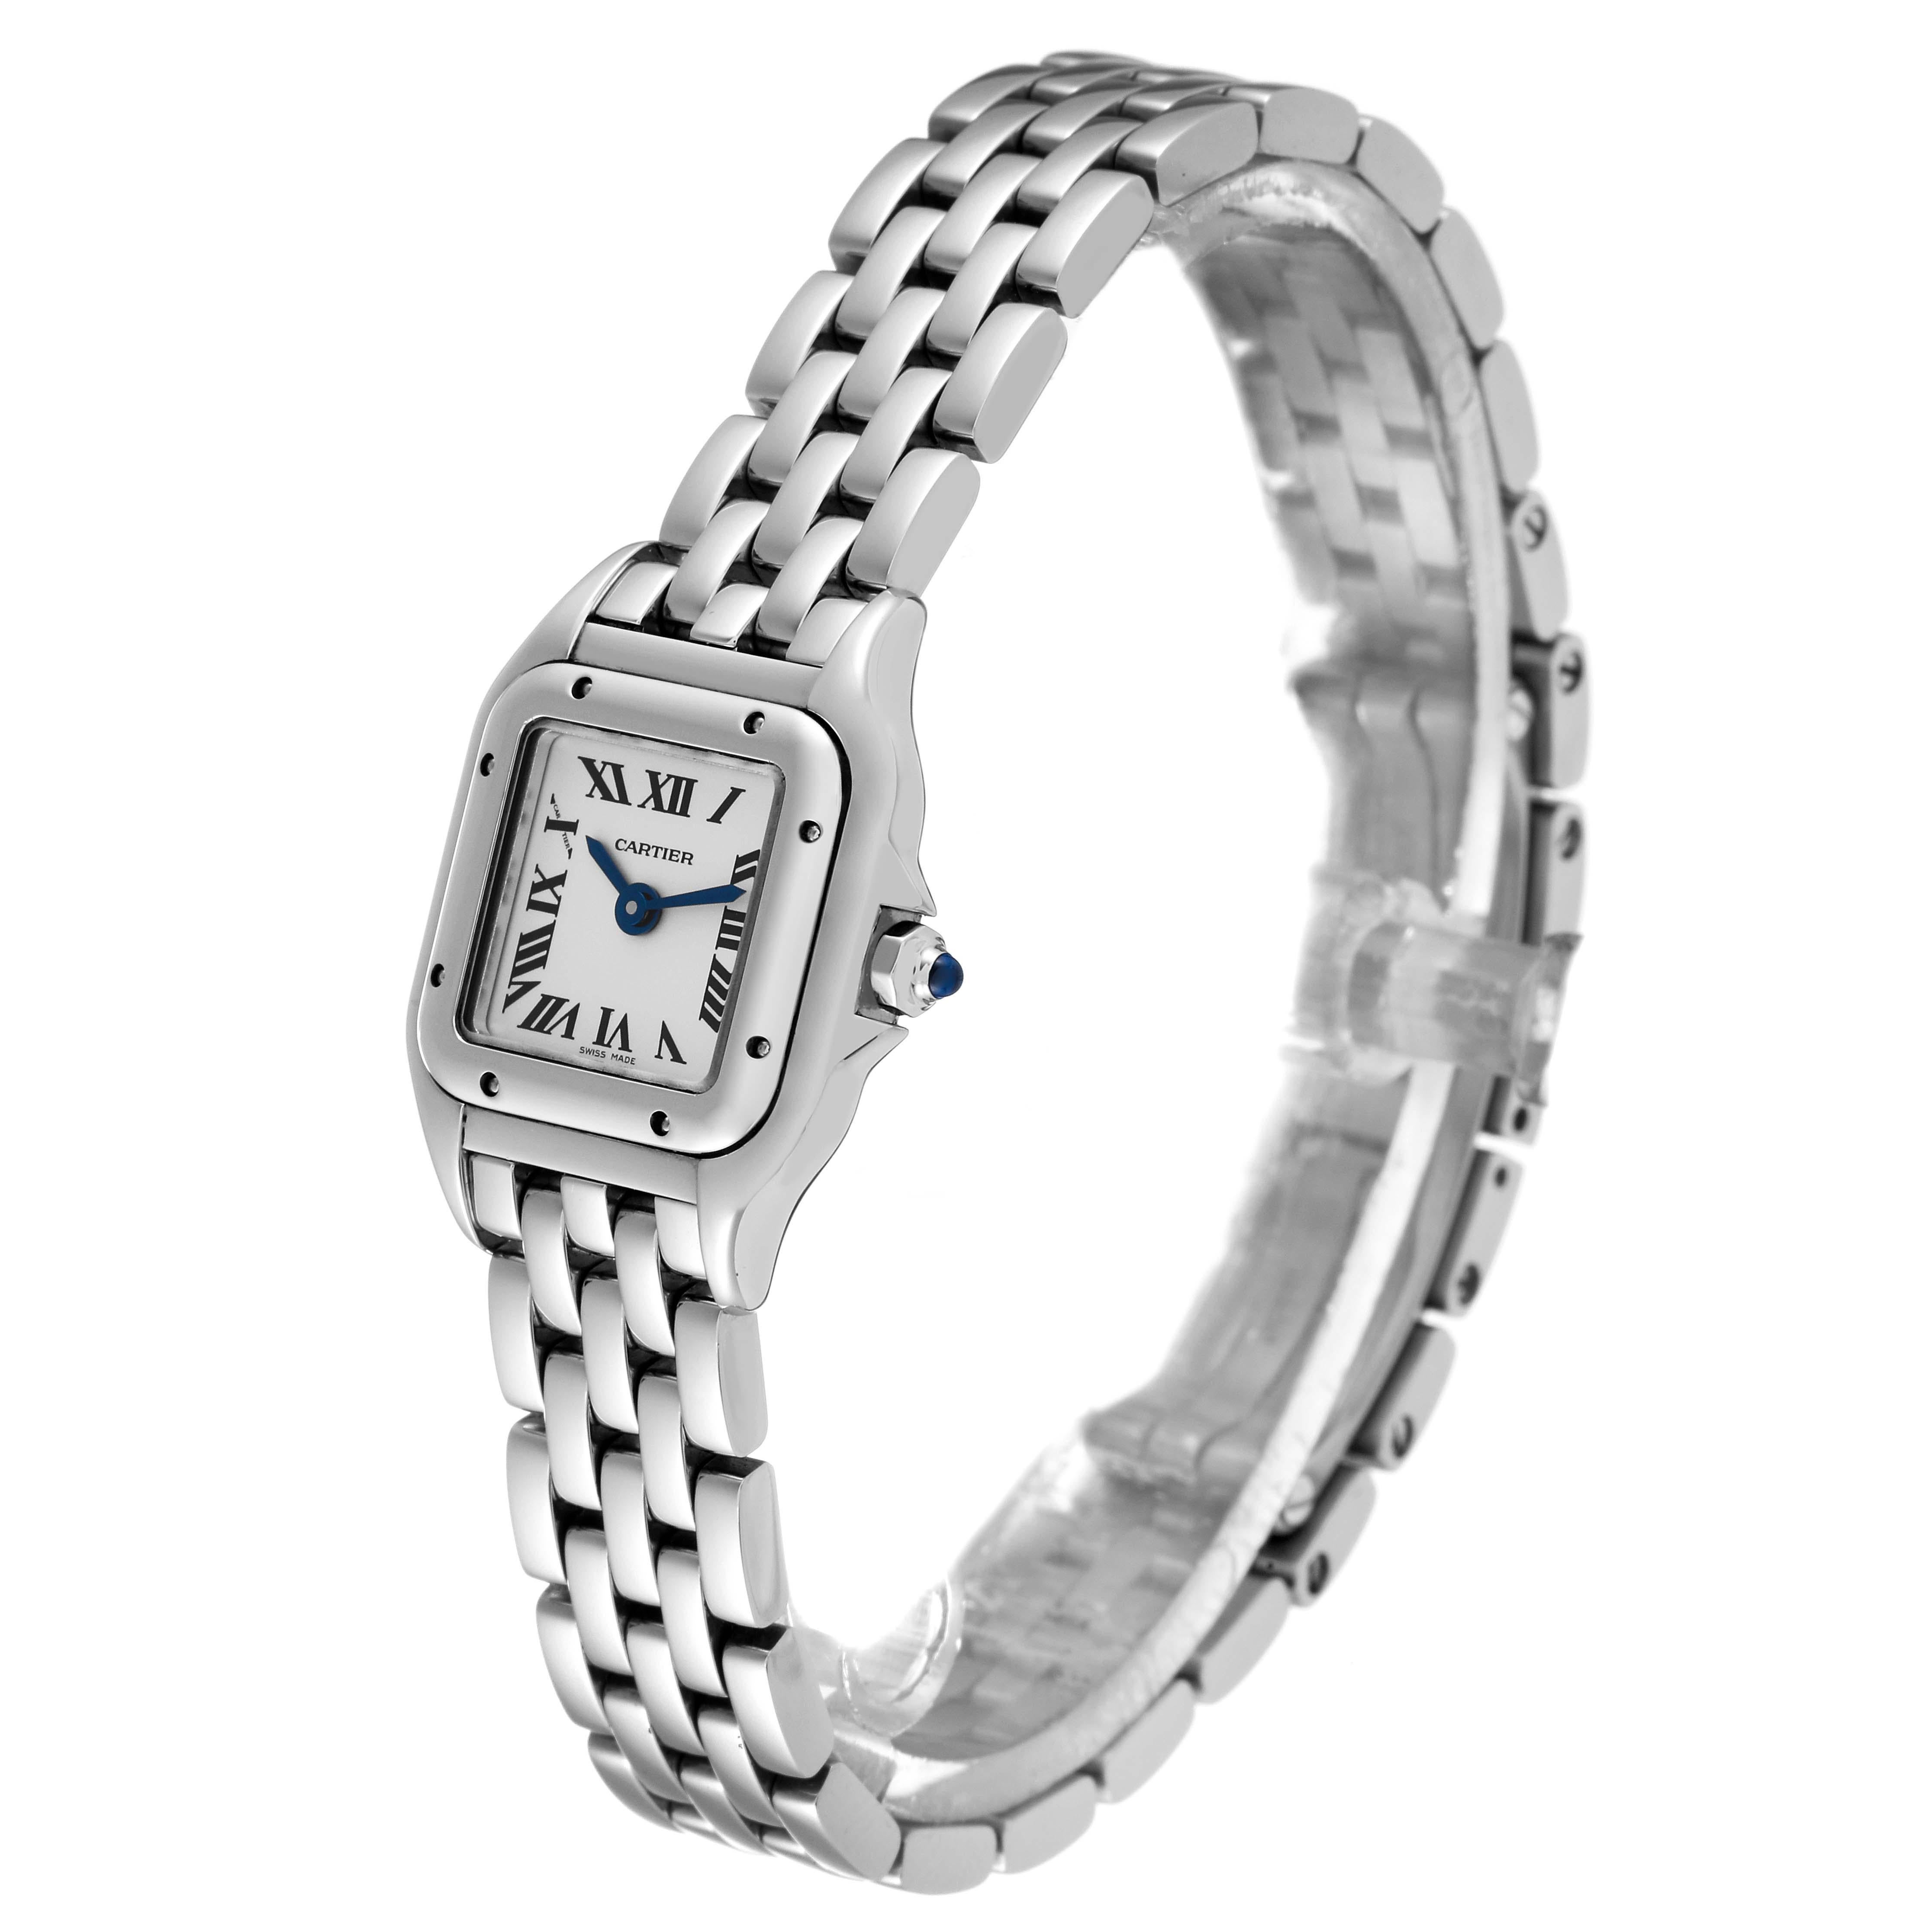 Cartier Panthere Mini Stainless Steel Ladies Watch WSPN0019 Box Card For Sale 2